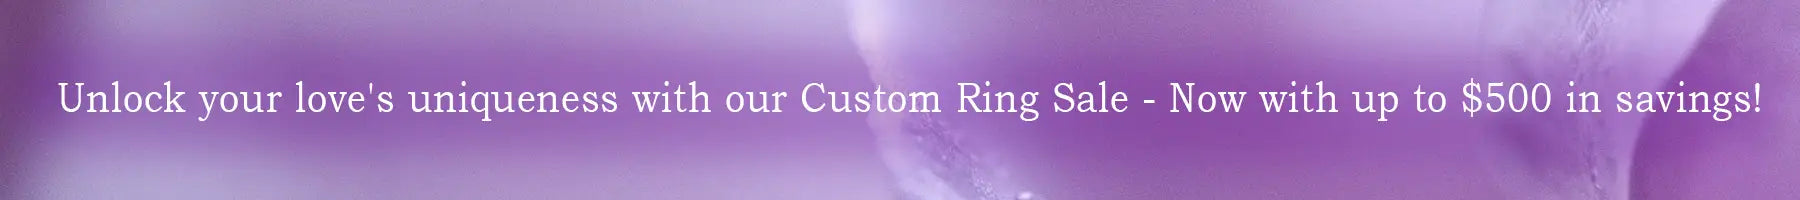 Custom Design Engagement and Ring Jewelry Promotion at Quorri Canada USA